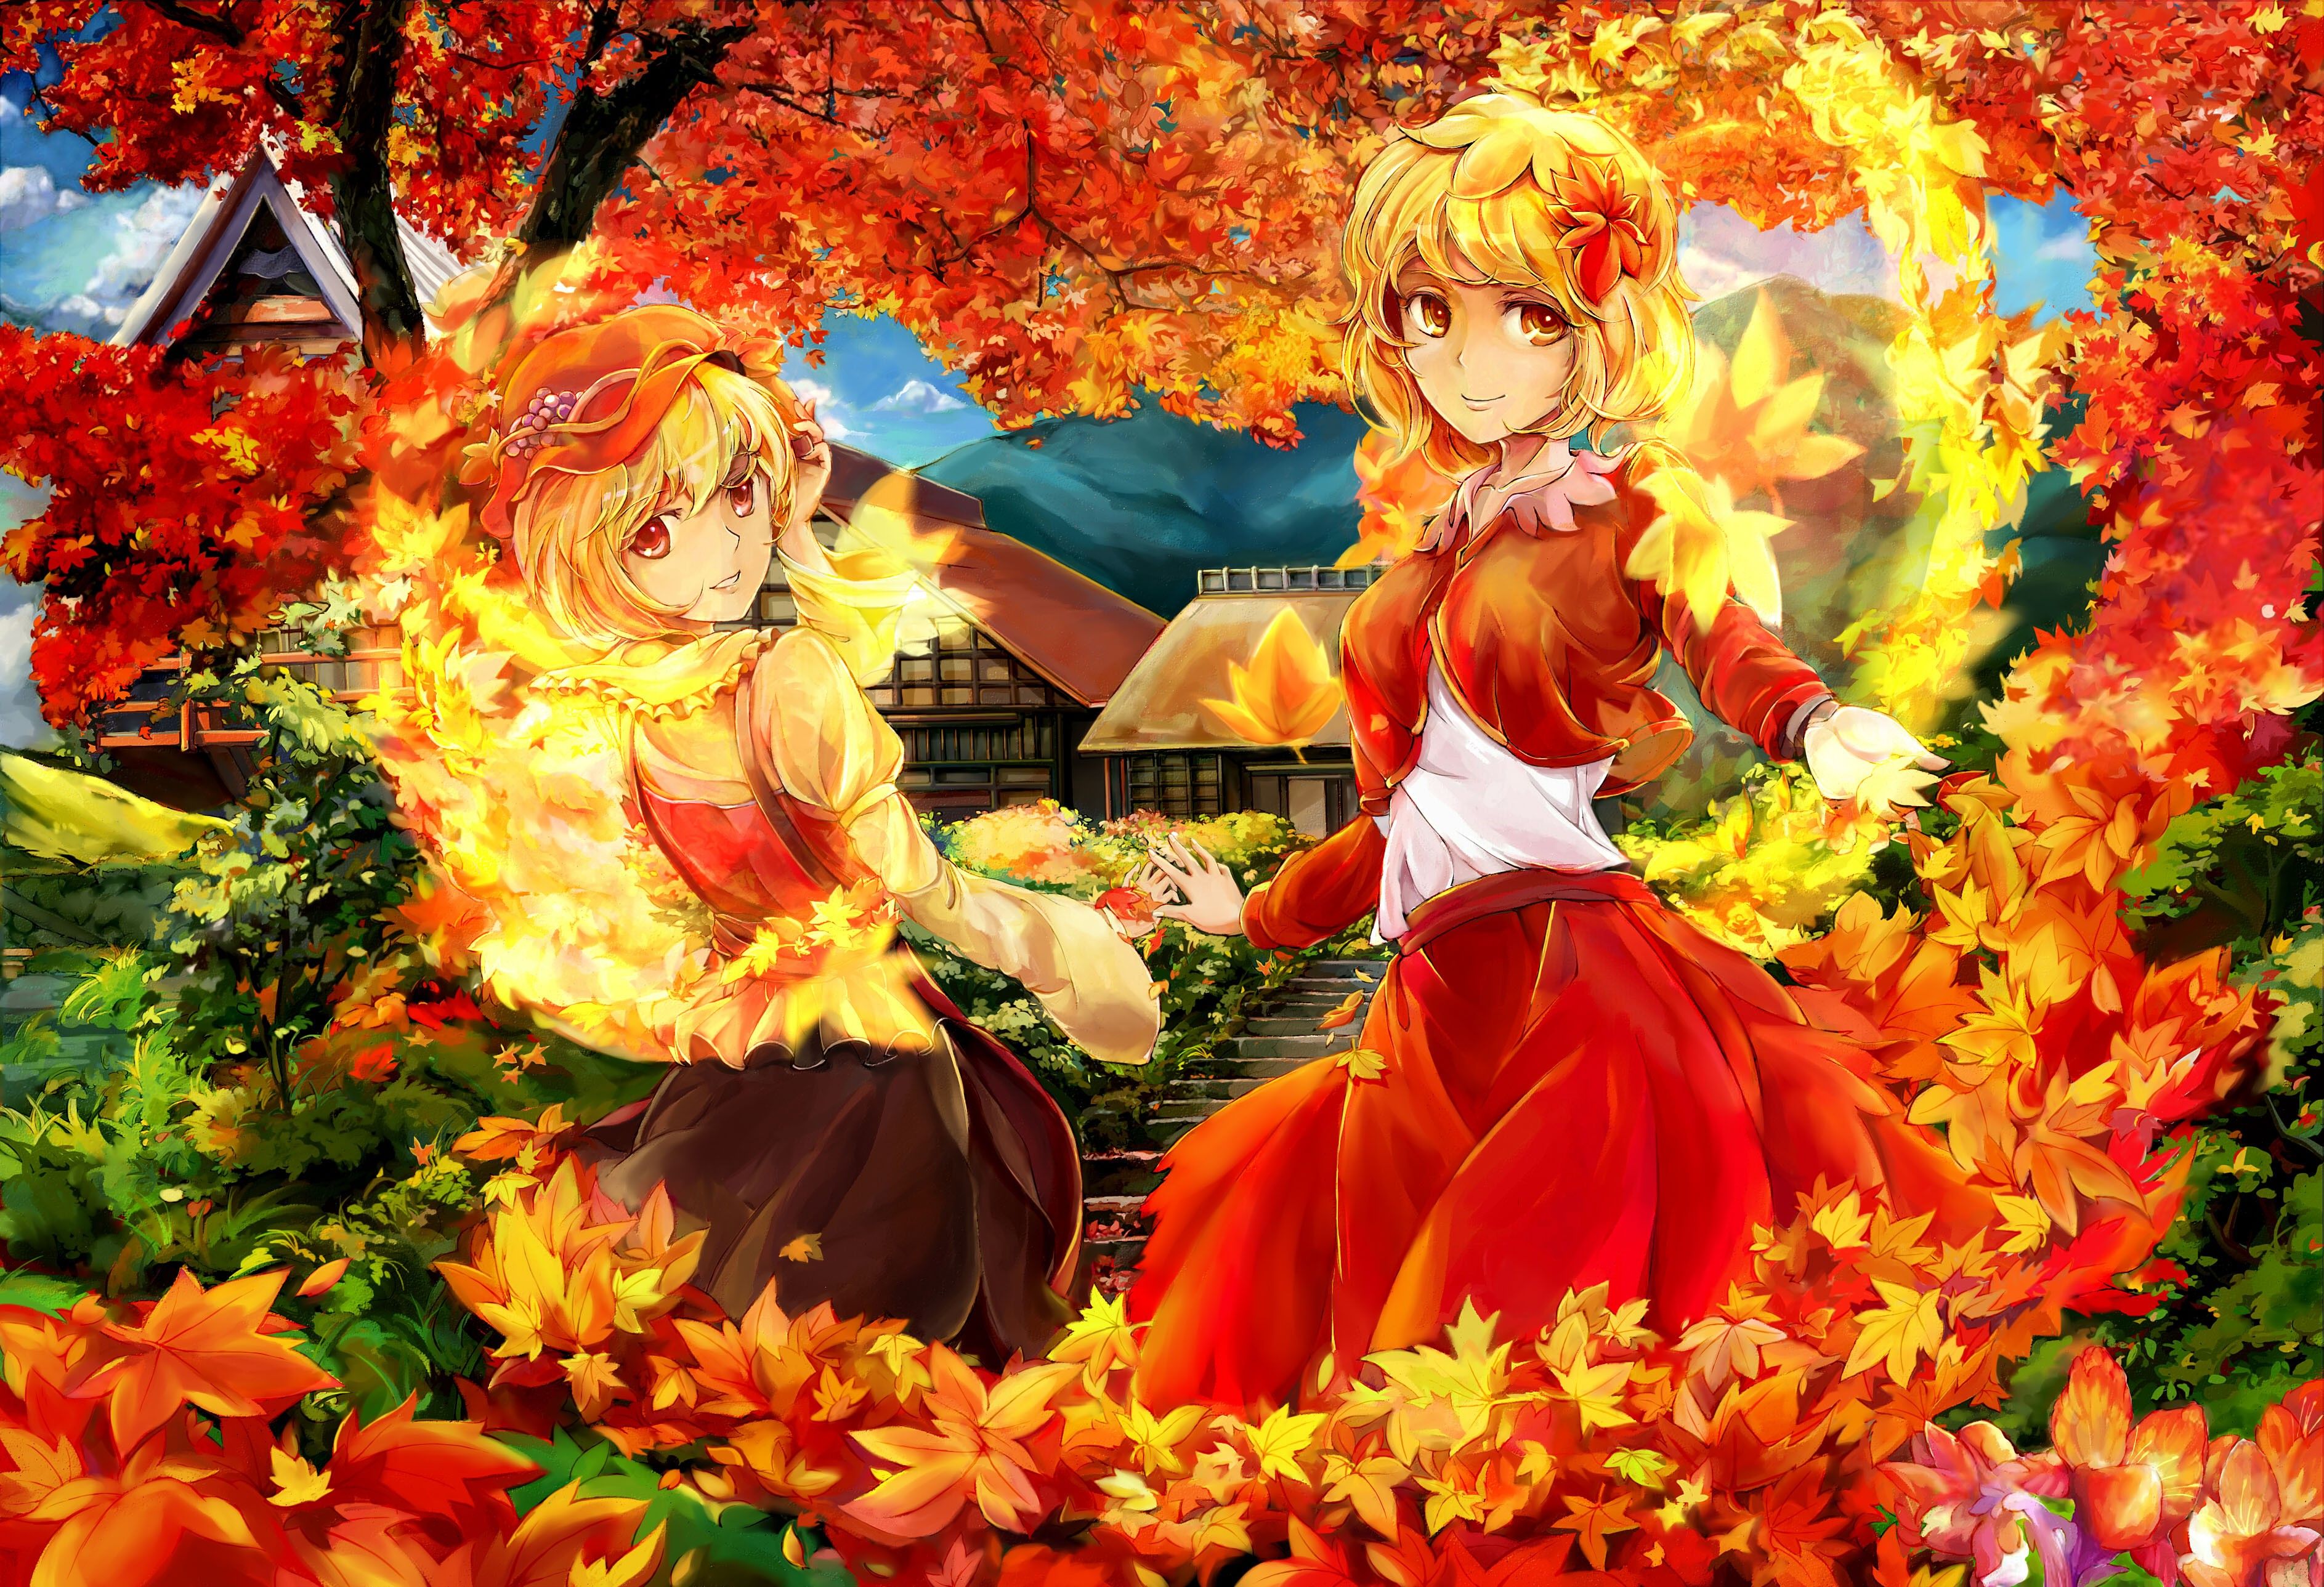 blondes, Video, Games, Mountains, Touhou, Trees, Autumn, Dress, Fruits, Leaves, Houses, Skirts, Buildings, Stairways, Goddess, Grapes, Red, Eyes, Short, Hair, Mountain, Of, Faith, Red, Dress, Sisters, Aprons, Or Wallpaper HD / Desktop